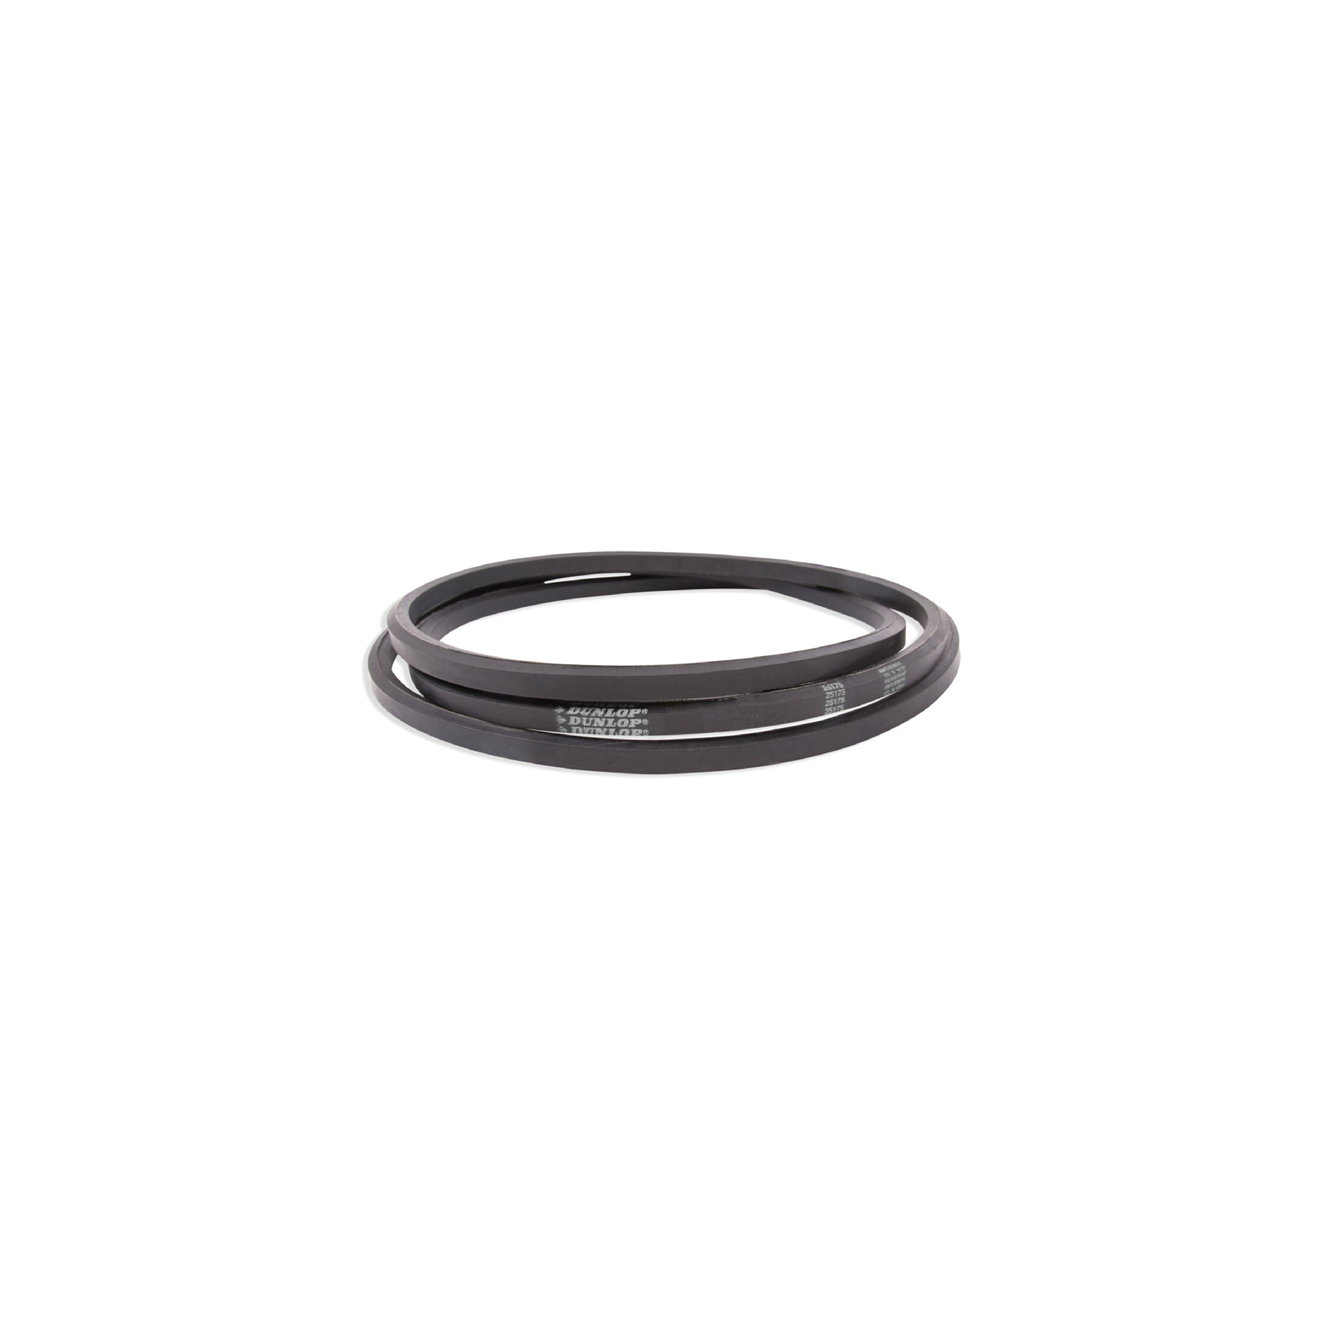 COUNTAX A25-50 50" IBS DECK BELT BB155 22950200 NEXT DAY DELIVERY 